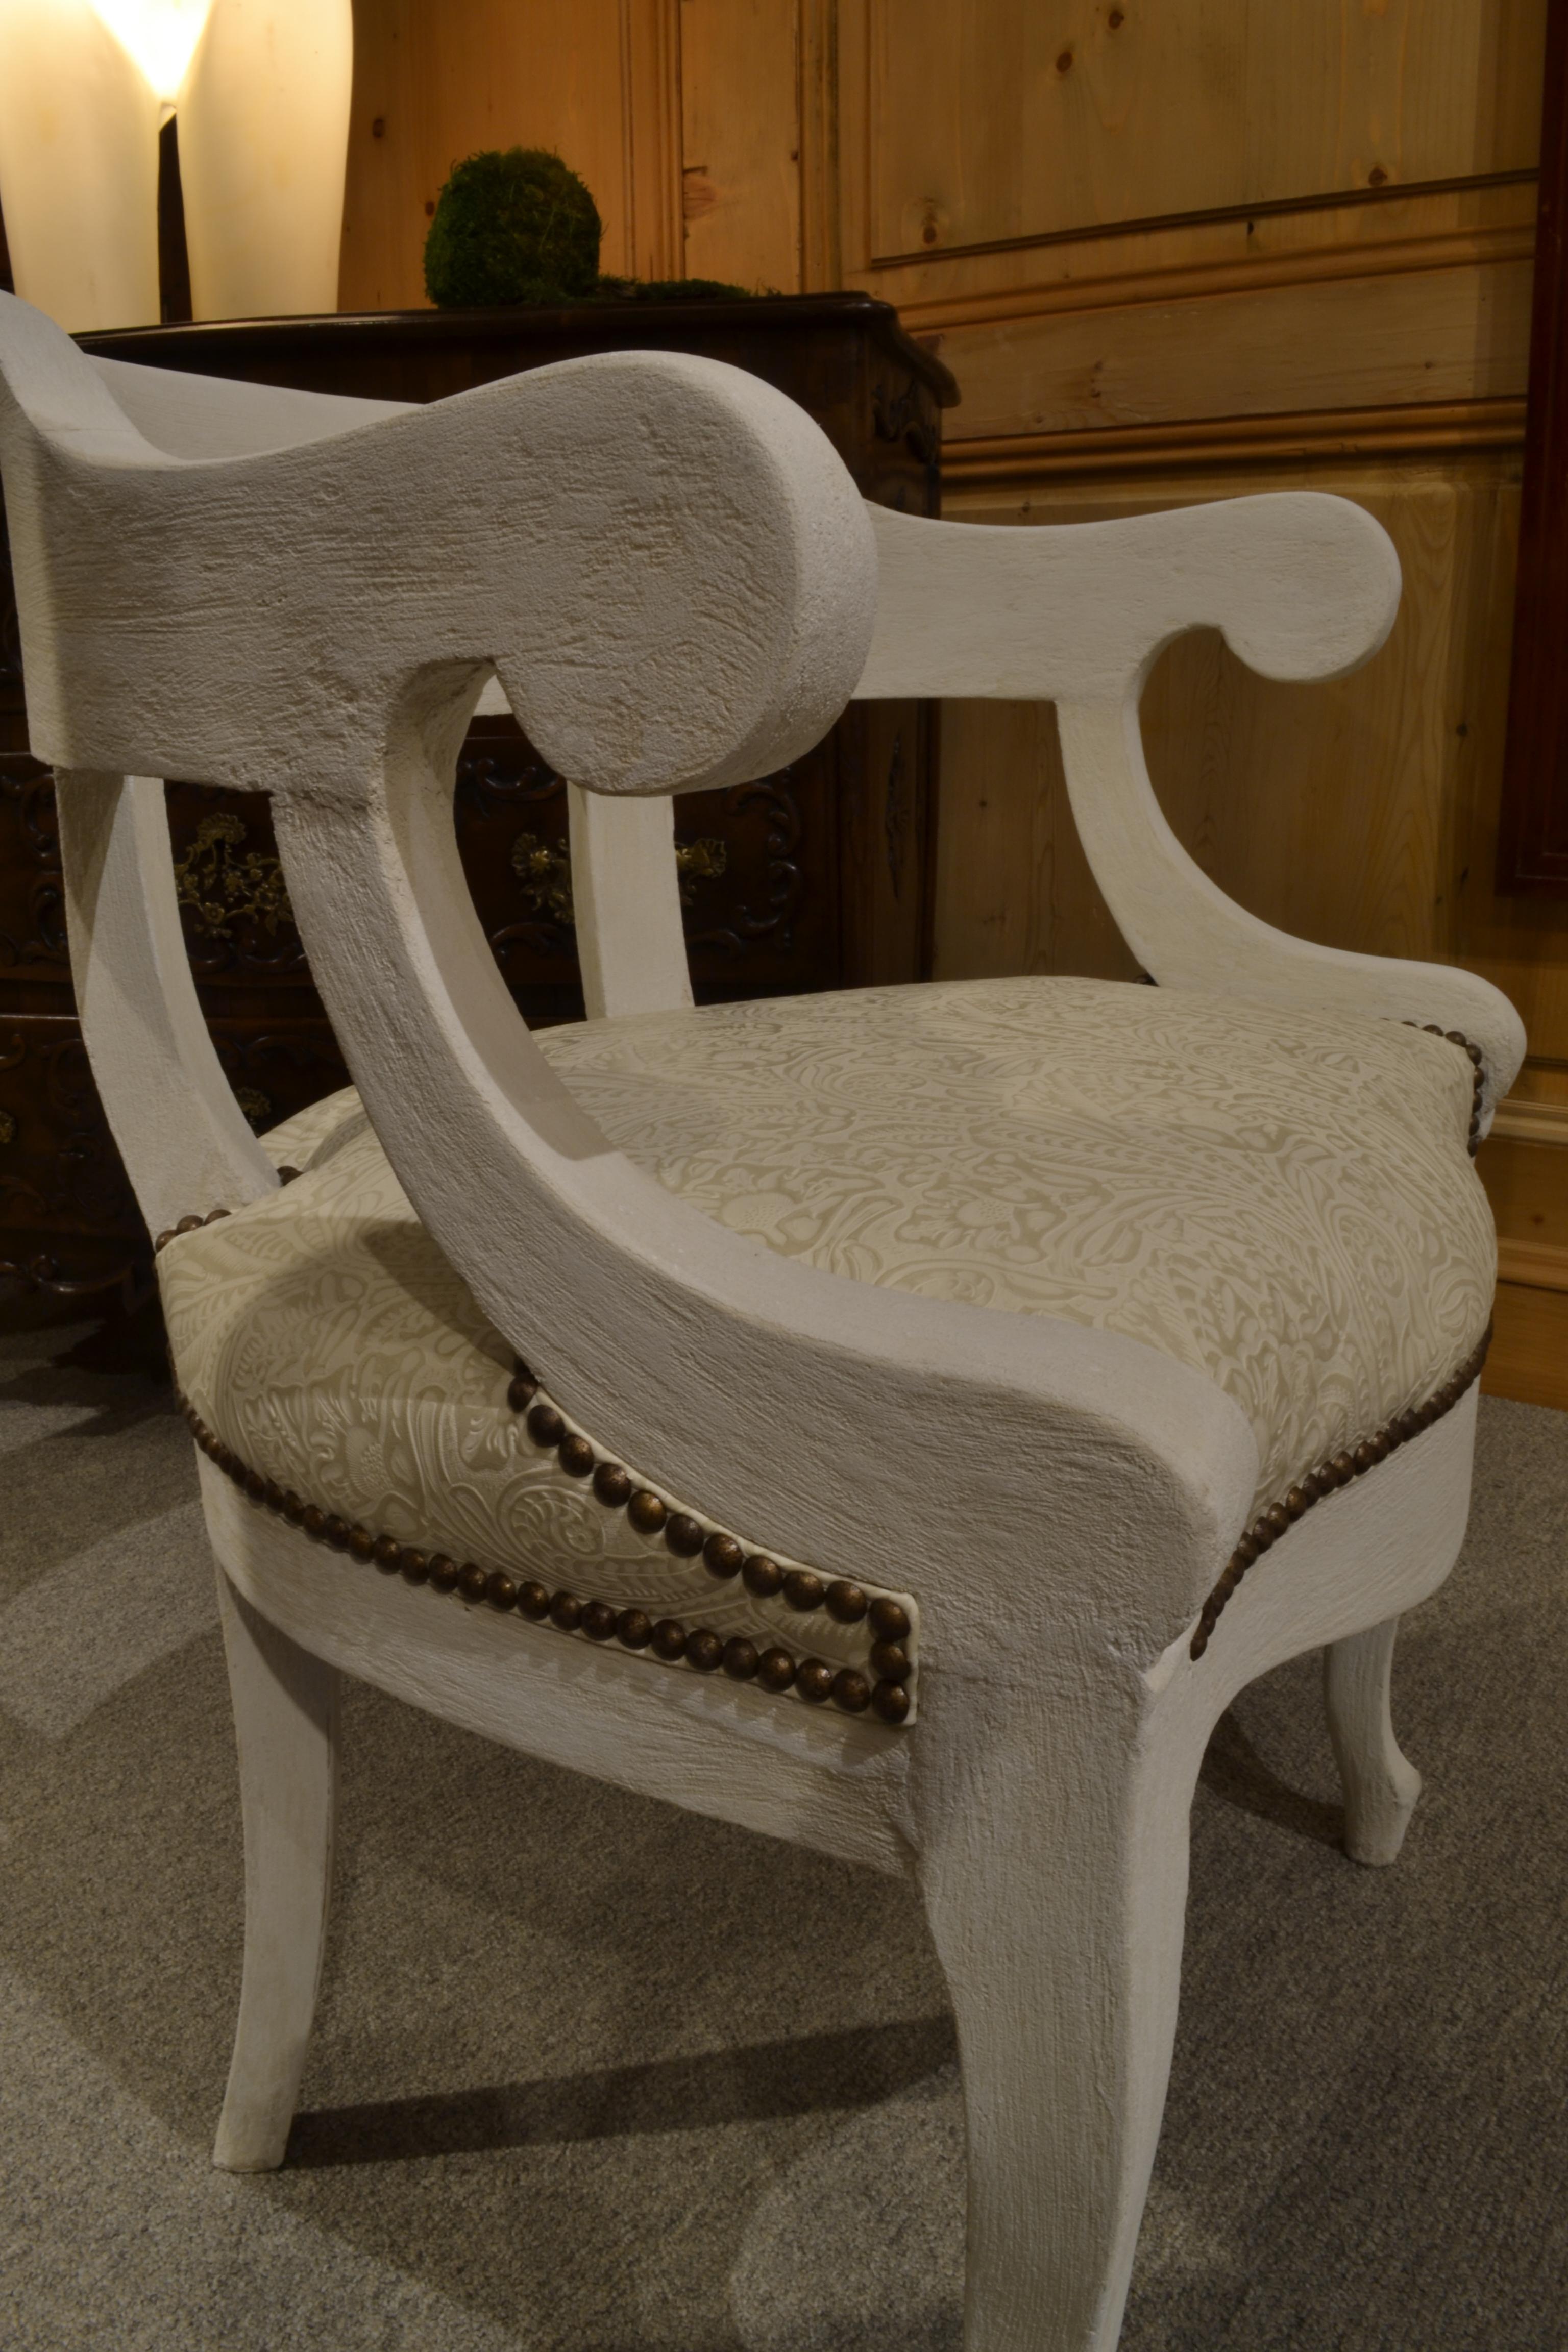 This comfortable armchair has a low, curved back and a saddle seat. Nailheads frame the seat. It is lightweight in solid wood with a subtle but noticeable cement texture.